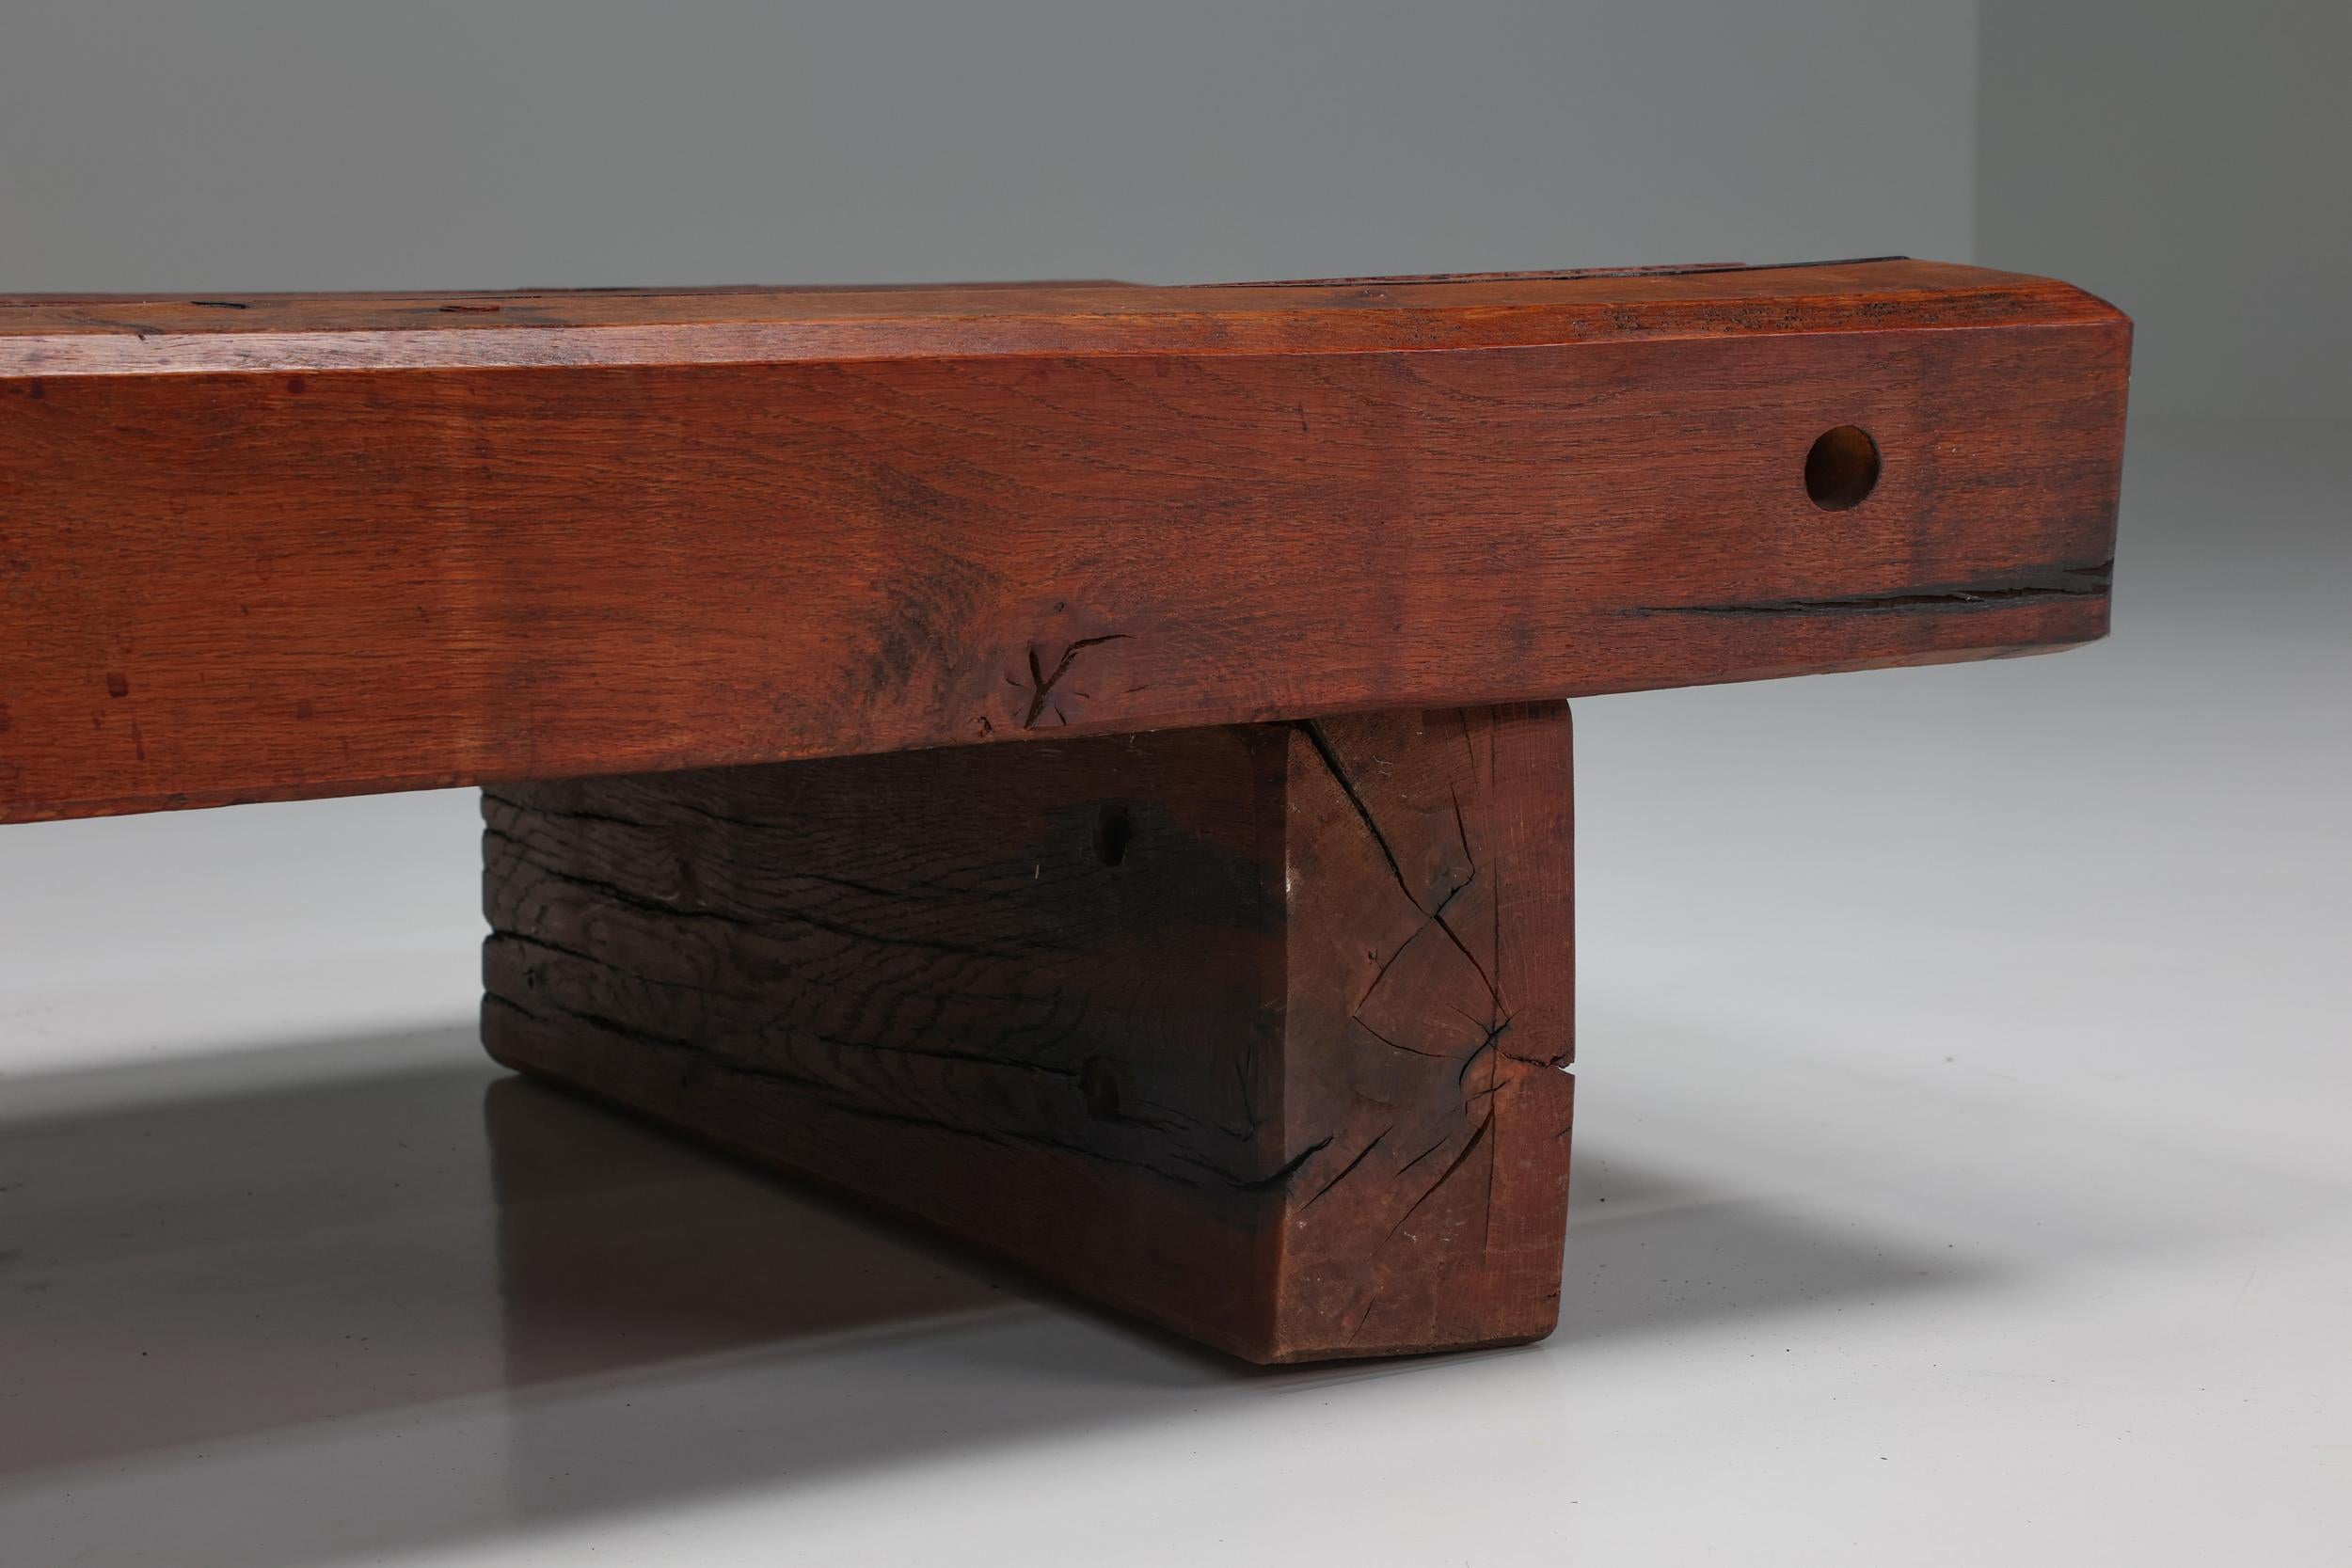 Mid-20th Century Rectangle Rustic Wood Coffee Table, Brutalist, Wabi-Sabi, Italy, 1940's For Sale